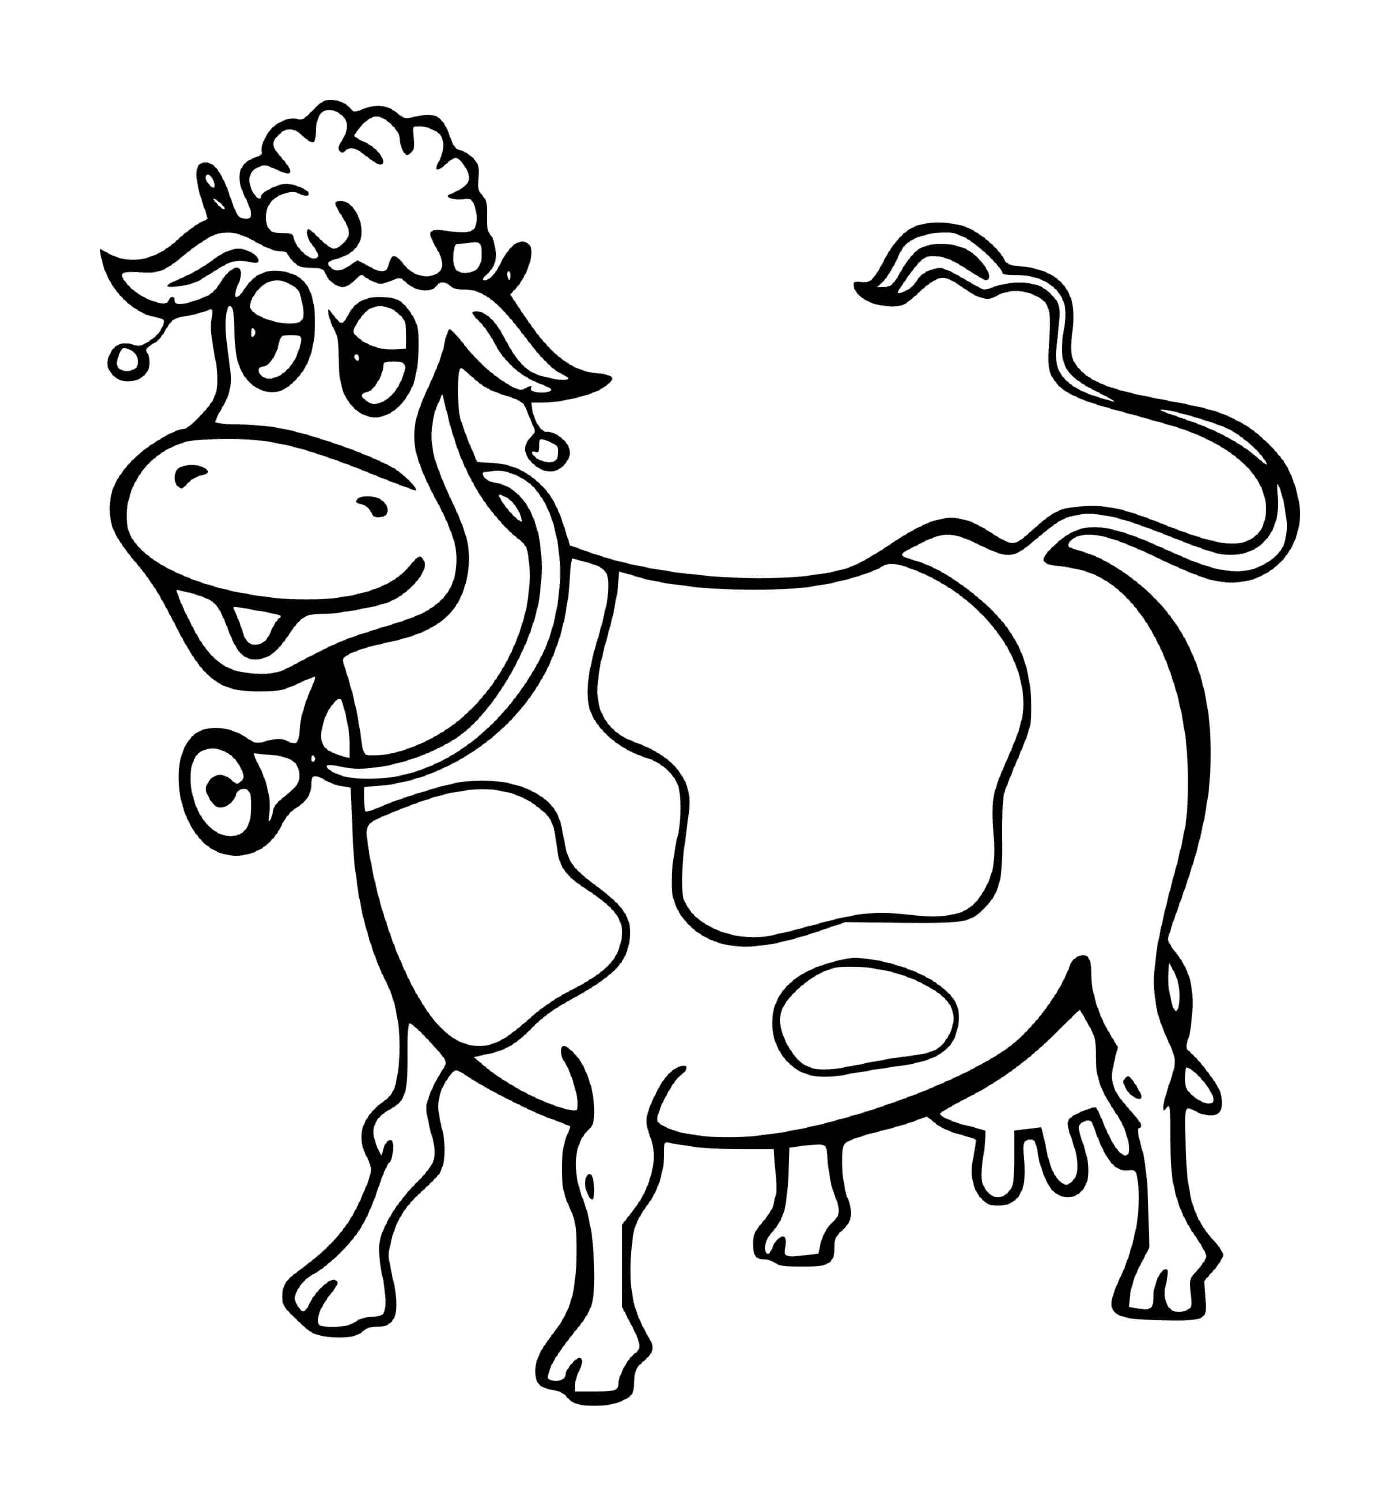  Cow with bell 